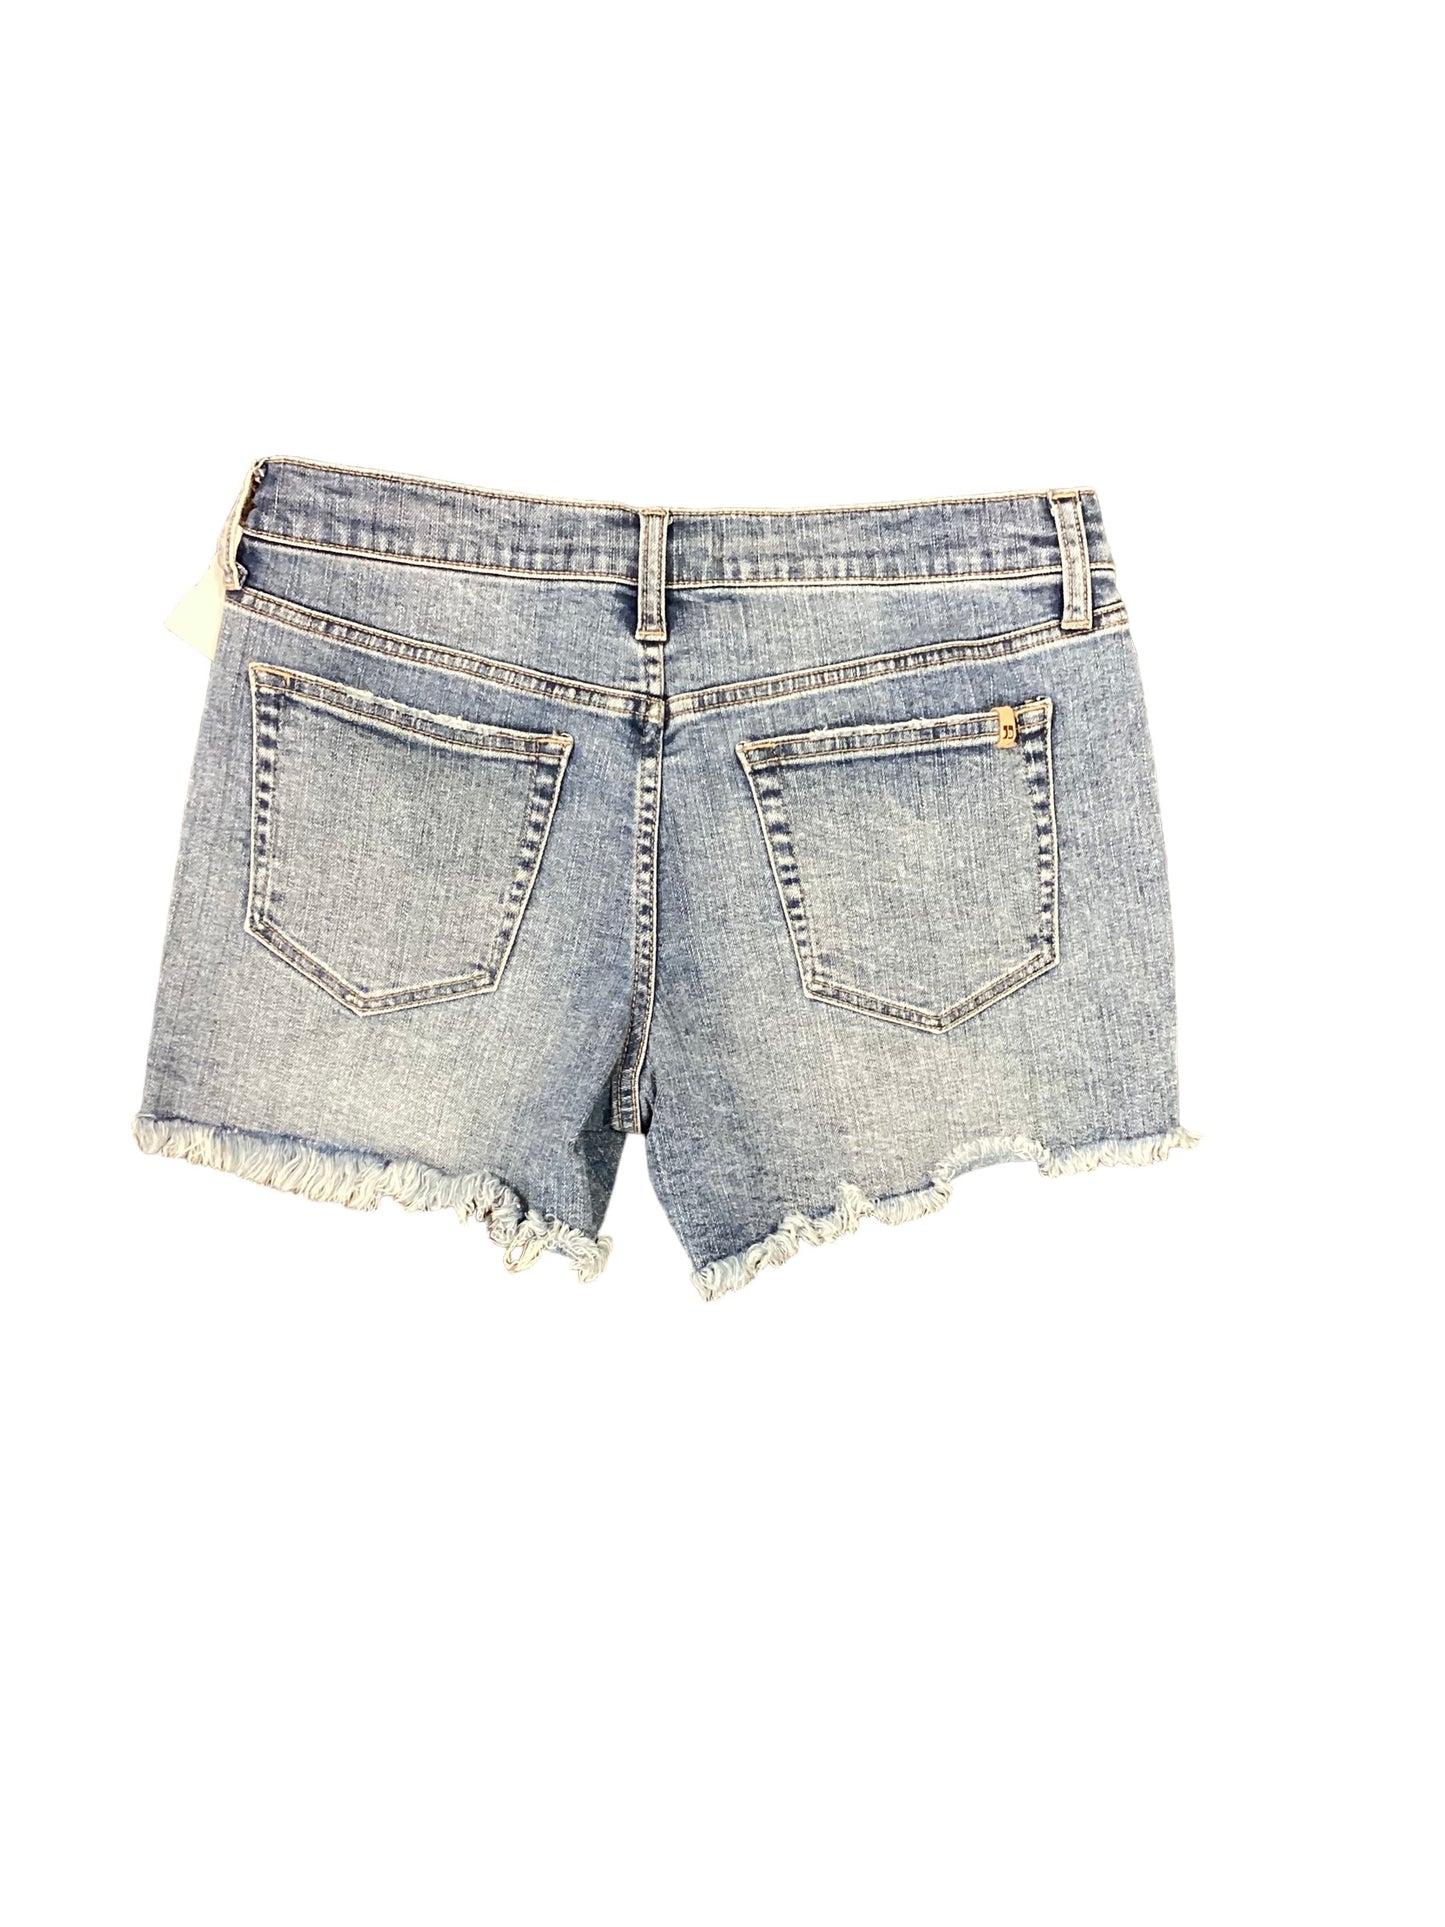 Shorts By Joes Jeans  Size: 4